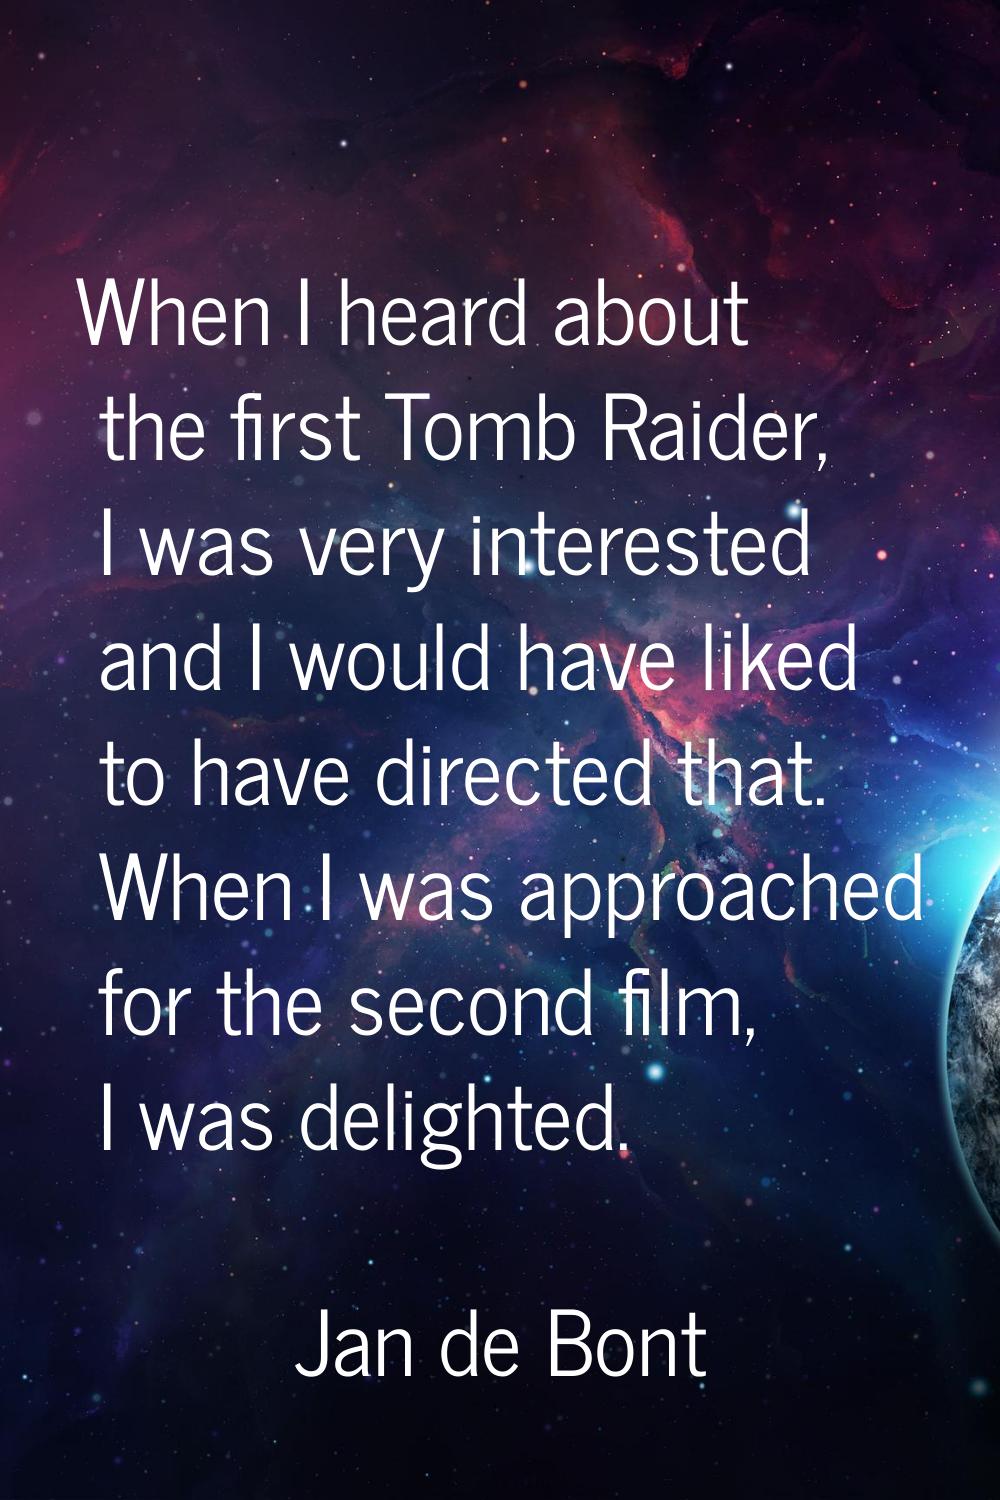 When I heard about the first Tomb Raider, I was very interested and I would have liked to have dire